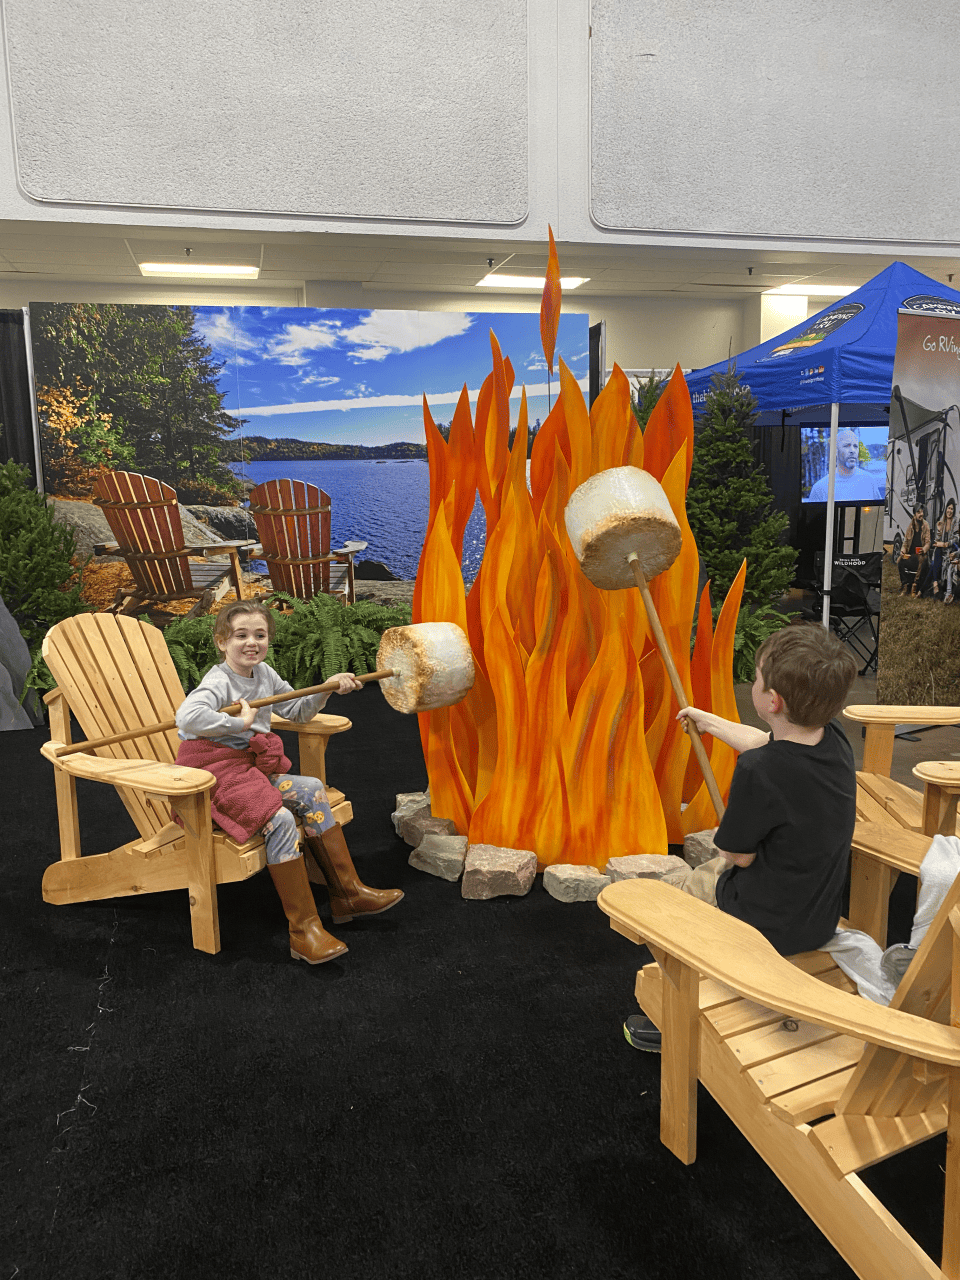 Go RVing Canada Sponsor Toronto RV Show 2024 Mississauga Ontario - Go RVing Canada is a yearly sponsor of the Toronto Spring Camping and RV Show. They always have a cute camping display for the kids (and adult kids) to snap a fun photo! 